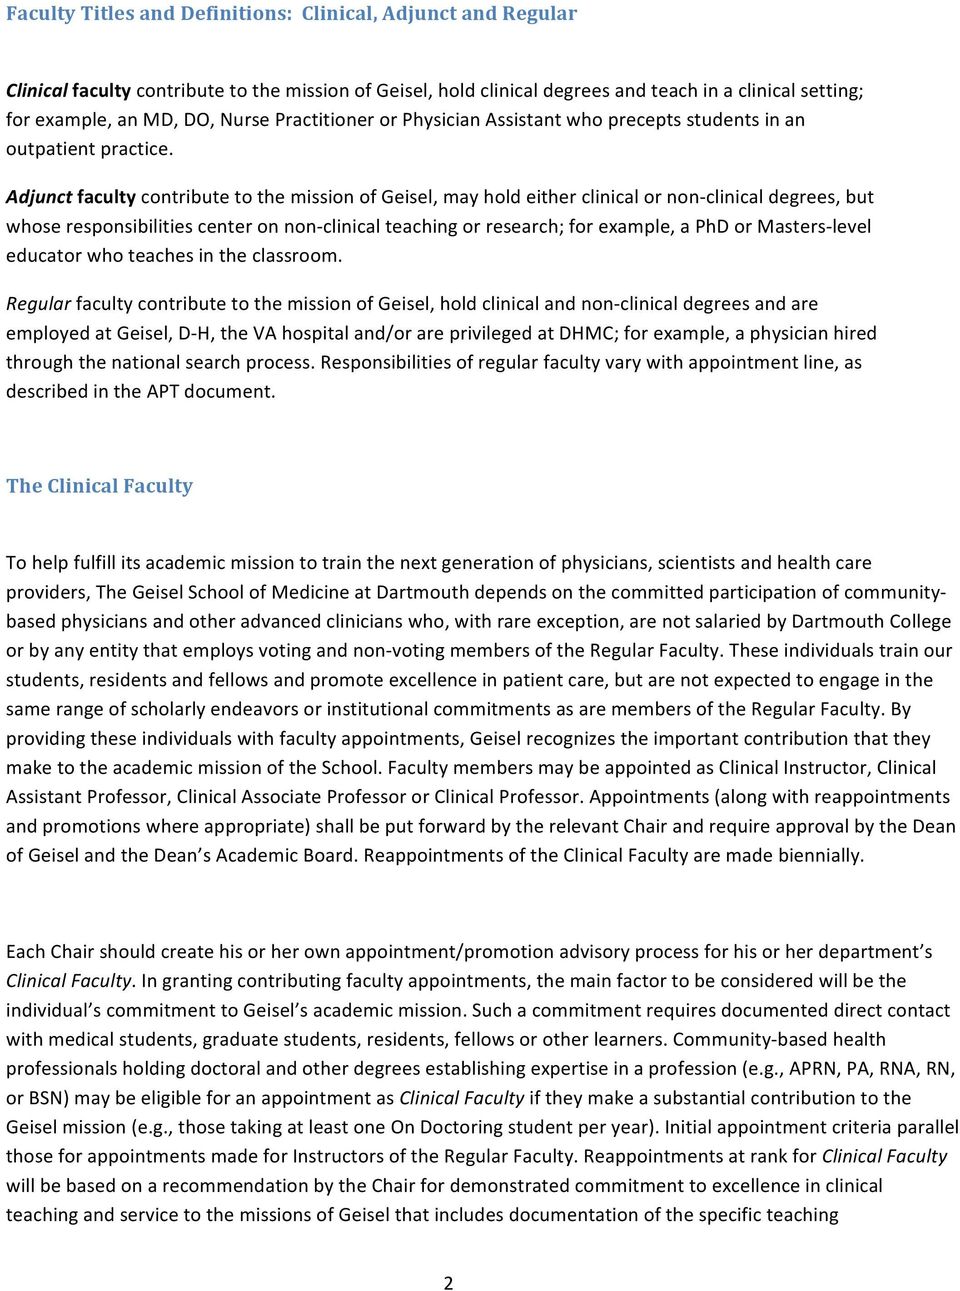 Adjunct faculty contribute to the mission of Geisel, may hold either clinical or non- clinical degrees, but whose responsibilities center on non- clinical teaching or research; for example, a PhD or